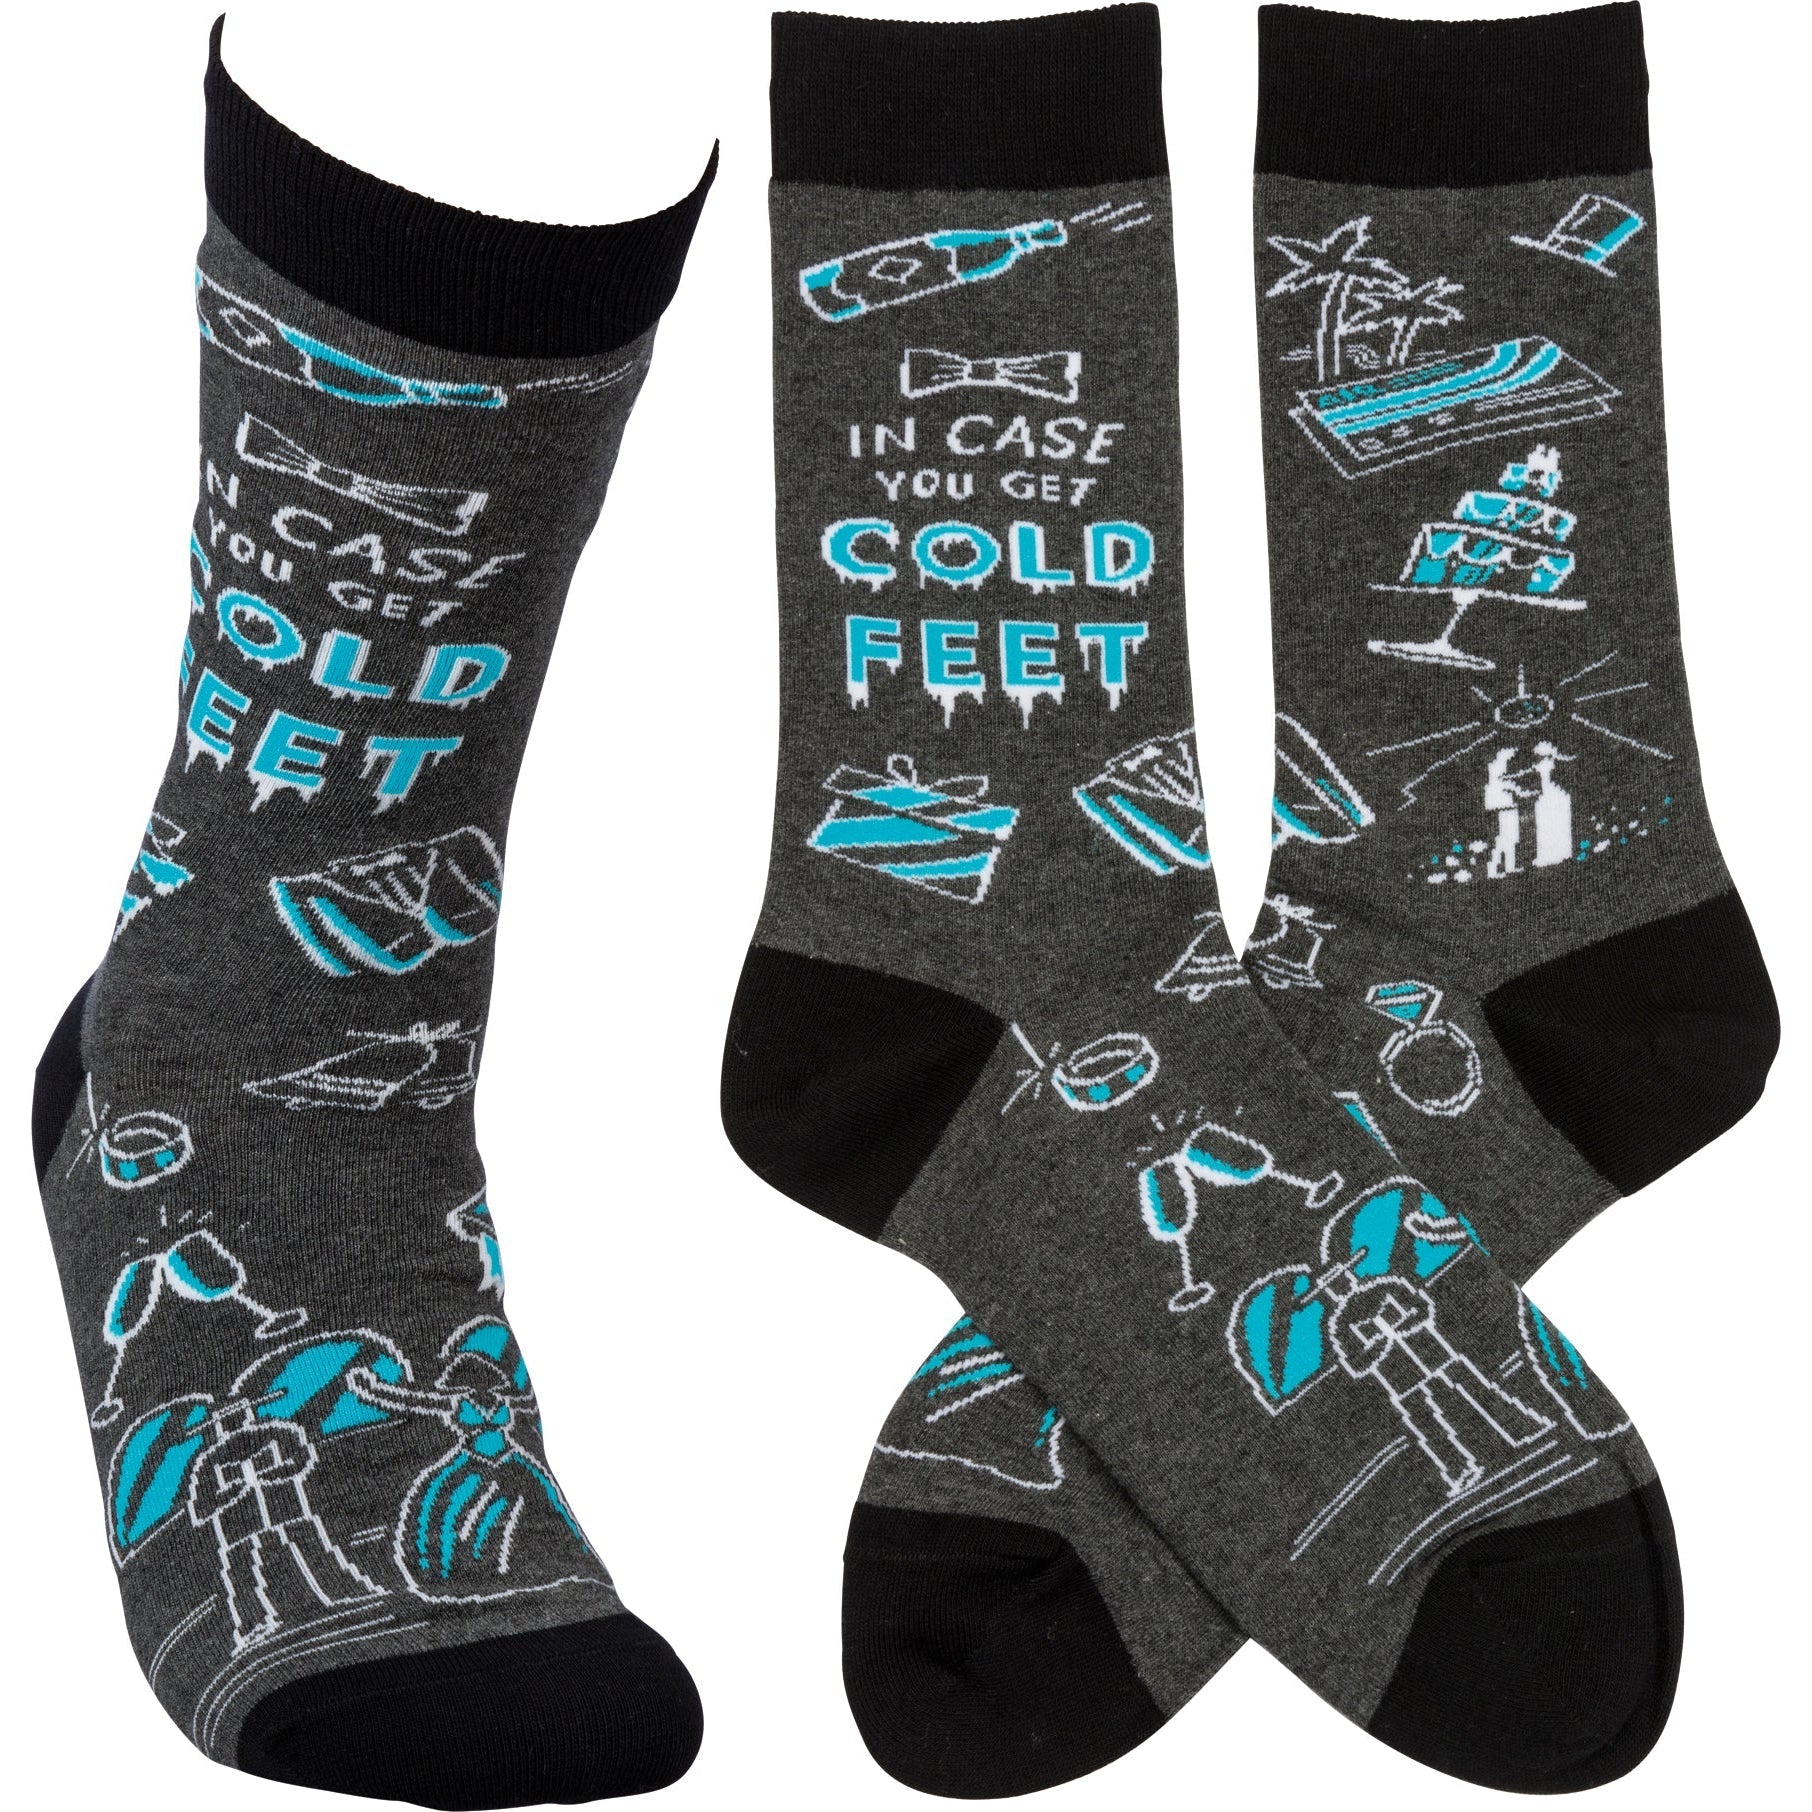 In Case You Get Cold Feet Crew Black Blue Funny Novelty Socks with Cool Design, Bold/Crazy/Unique/Quirky Specialty Dress Socks